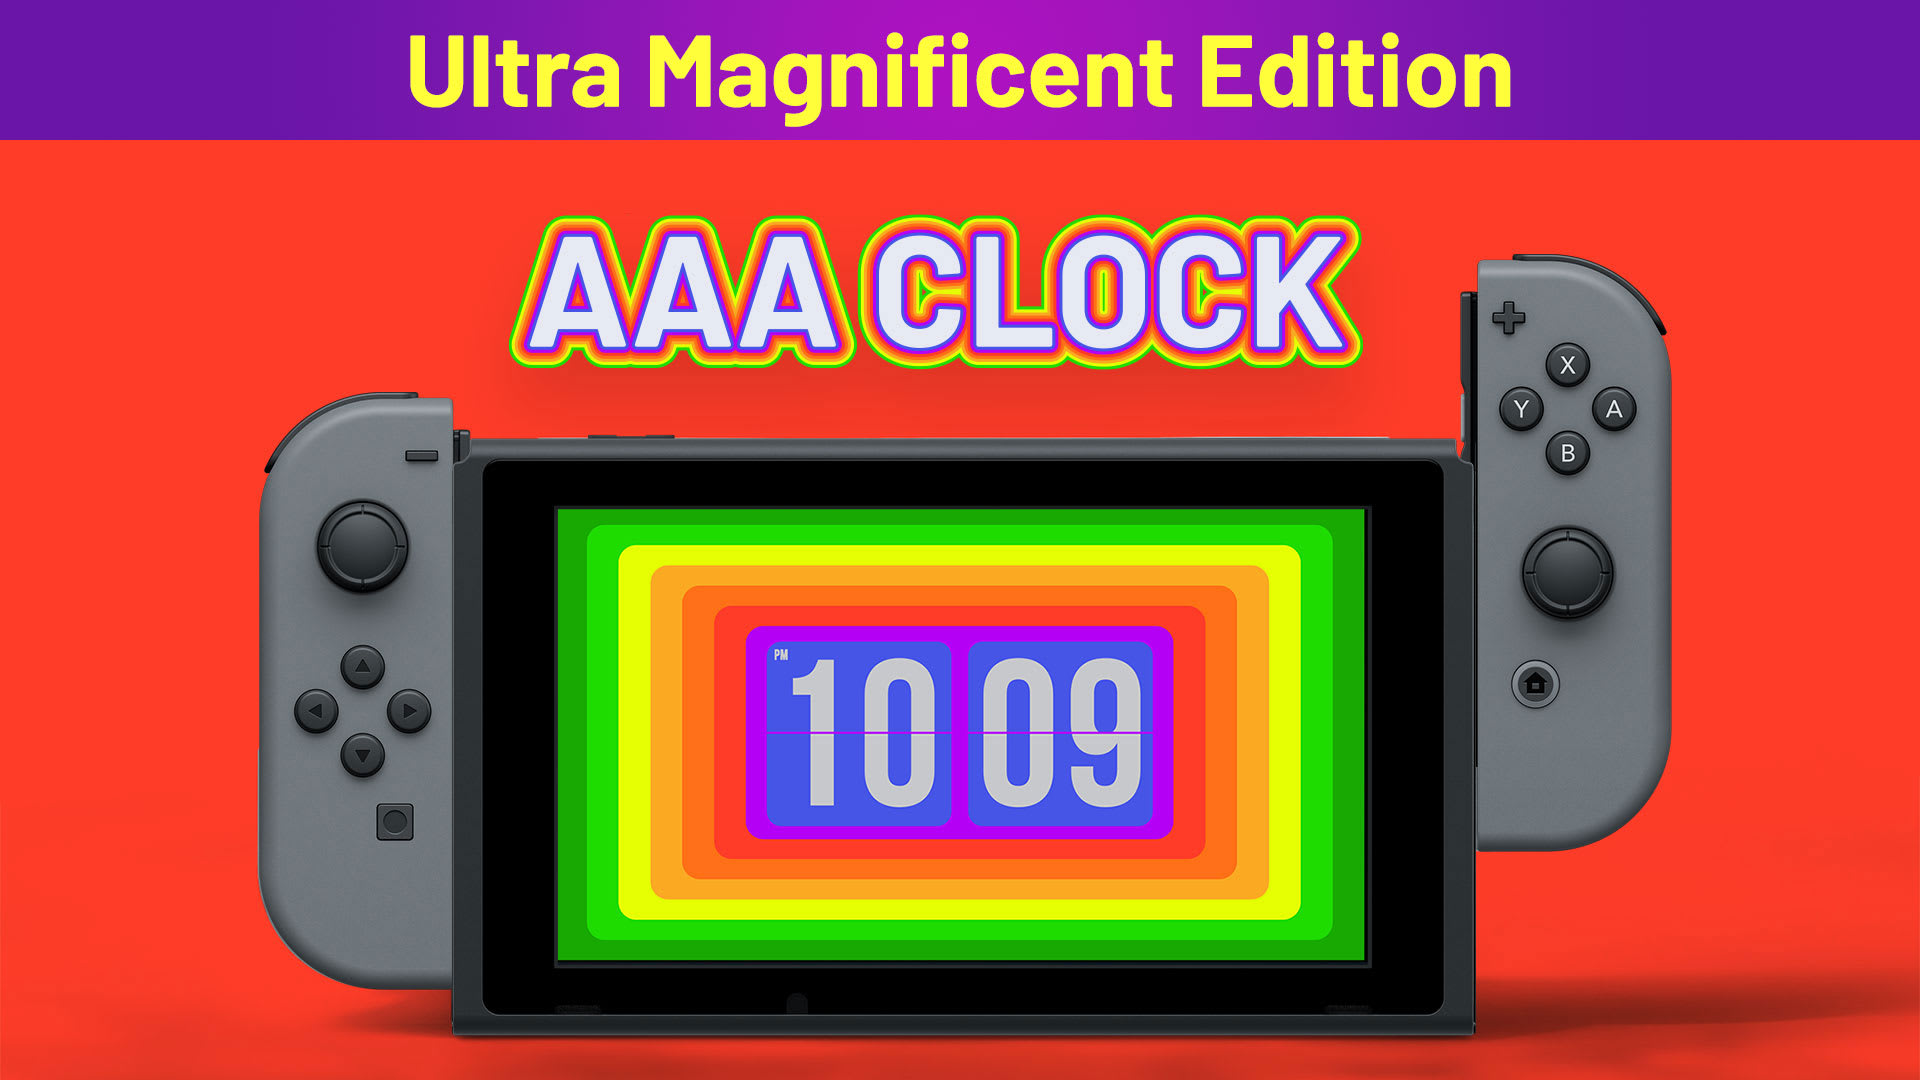 AAA Clock Ultra Magnificent Edition 1